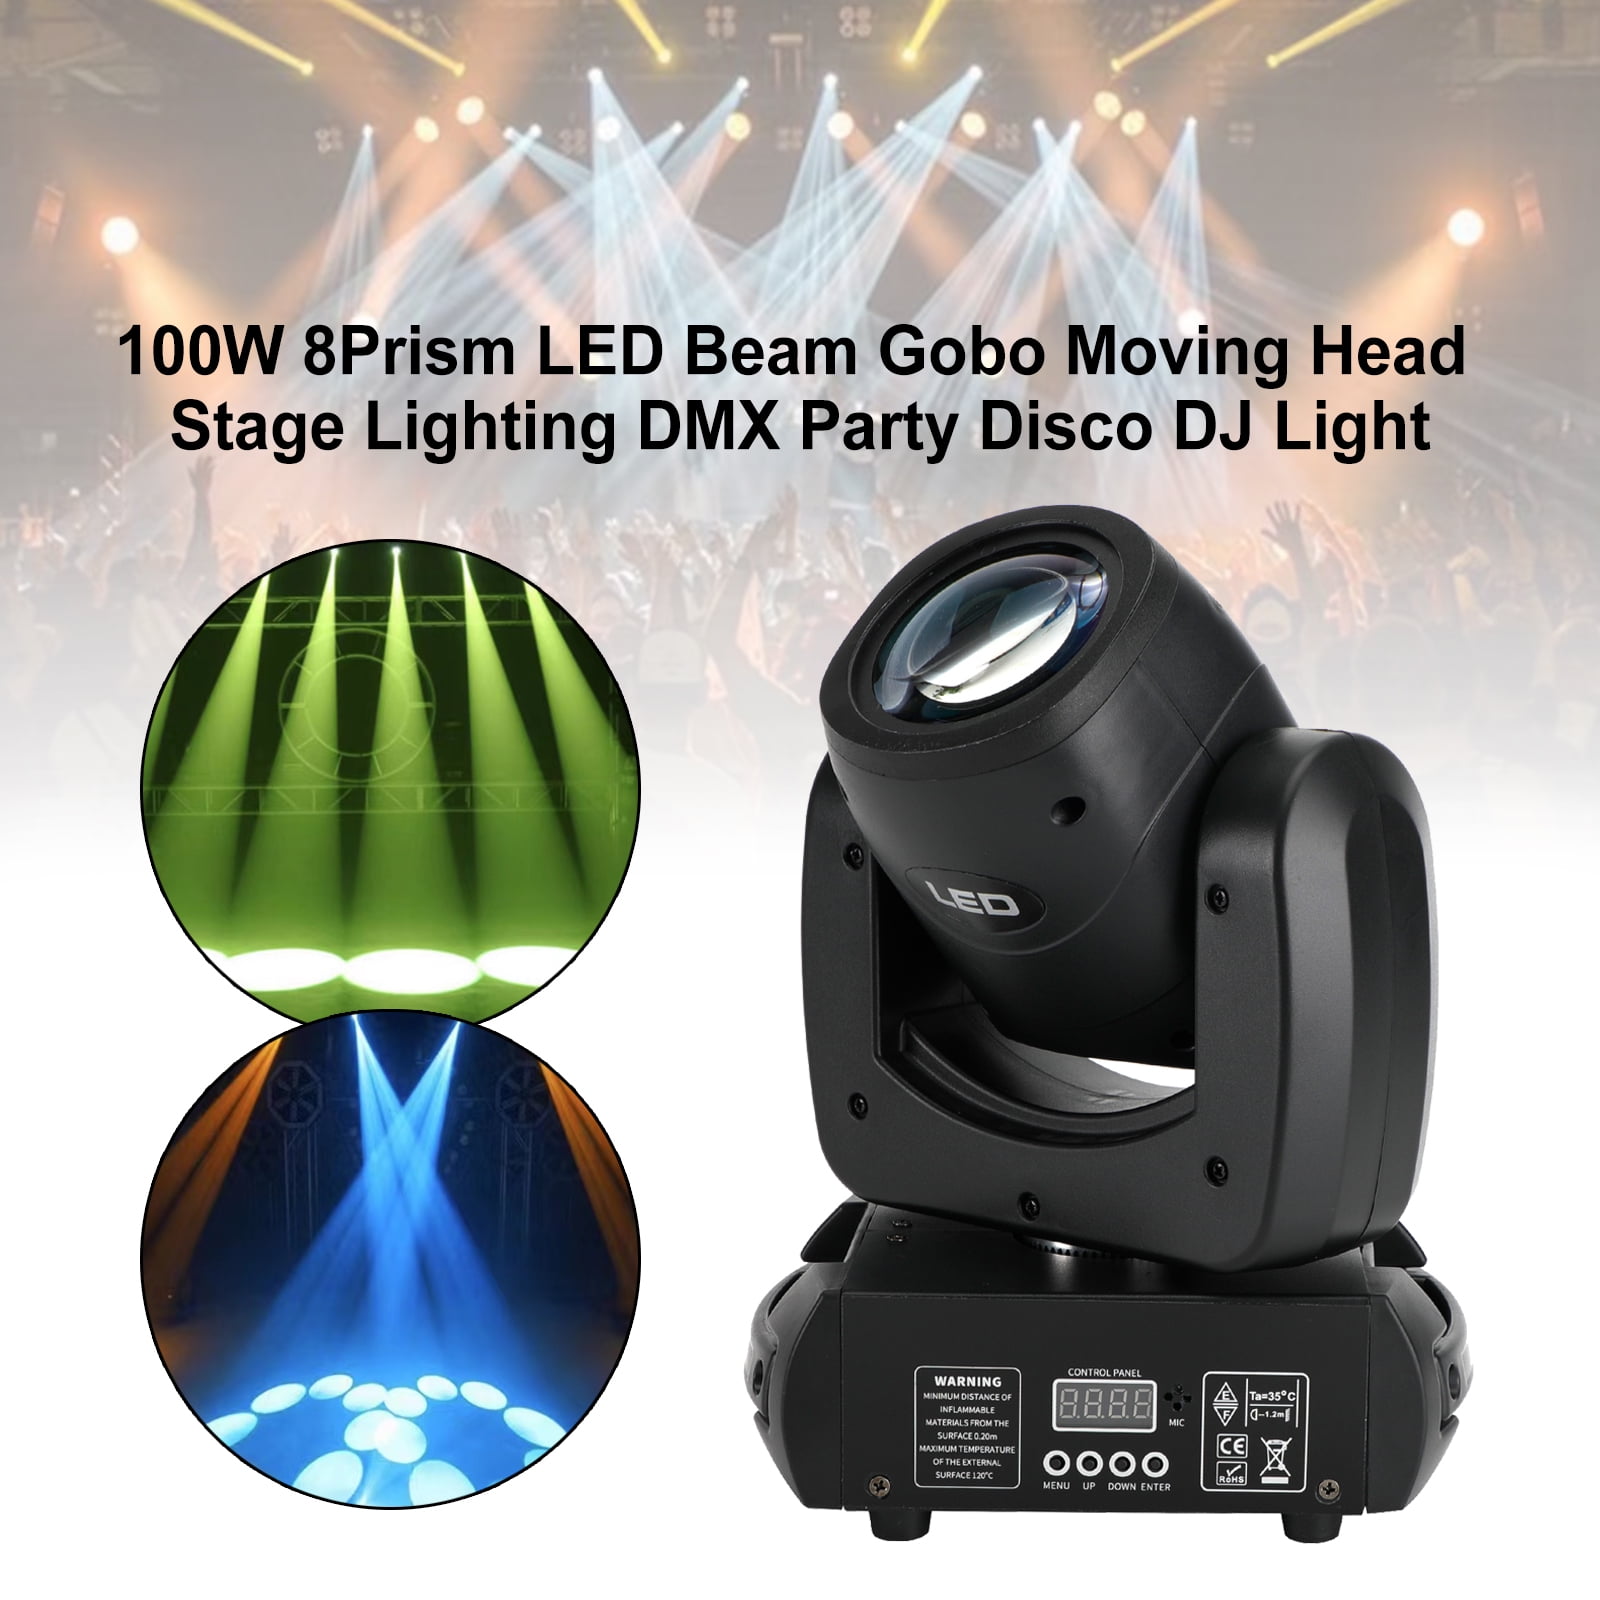 100W 8Prism LED Beam Gobo Moving Head Stage Lighting DMX Party